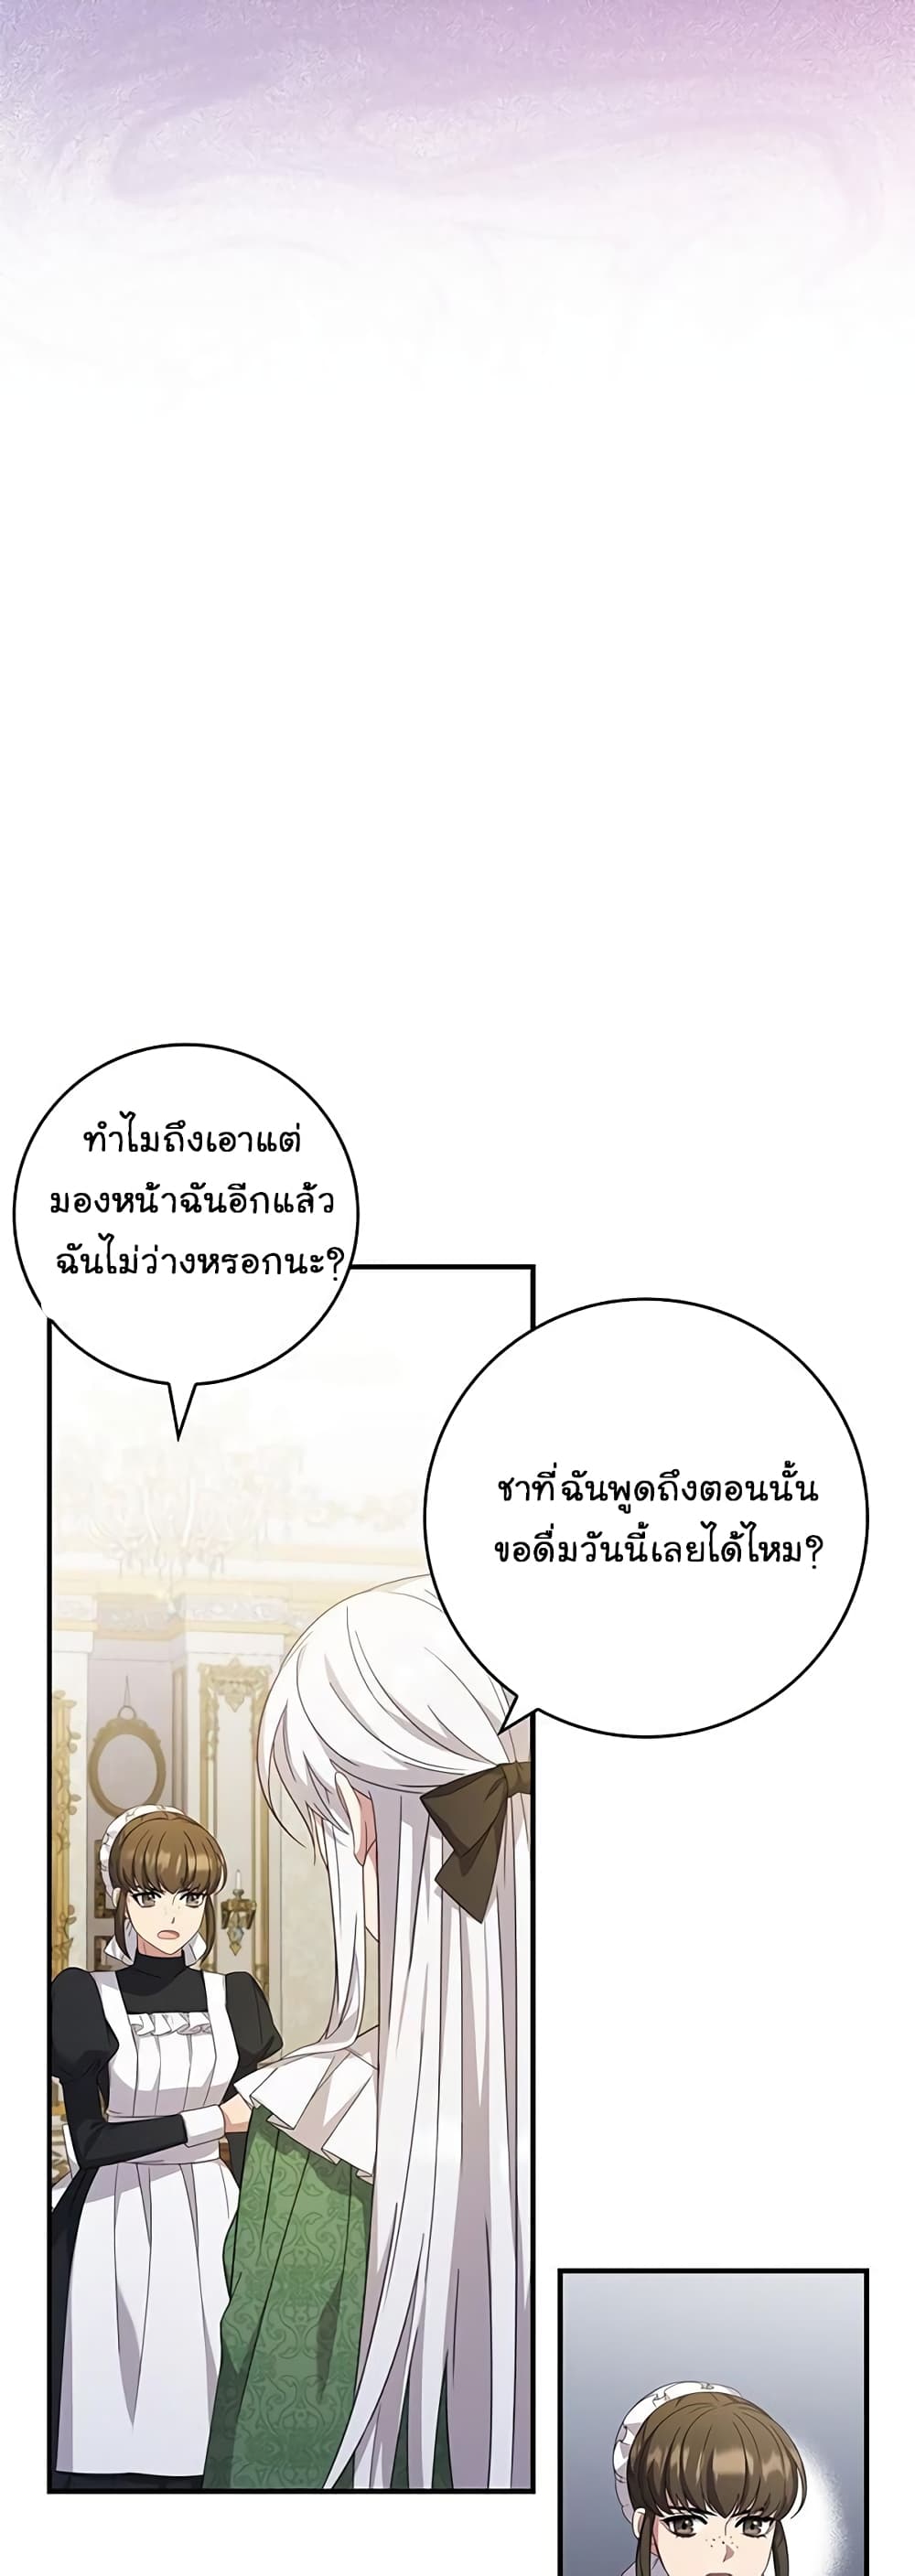 Fakes Don’t Want To Be Real ตอนที่ 9 (27)